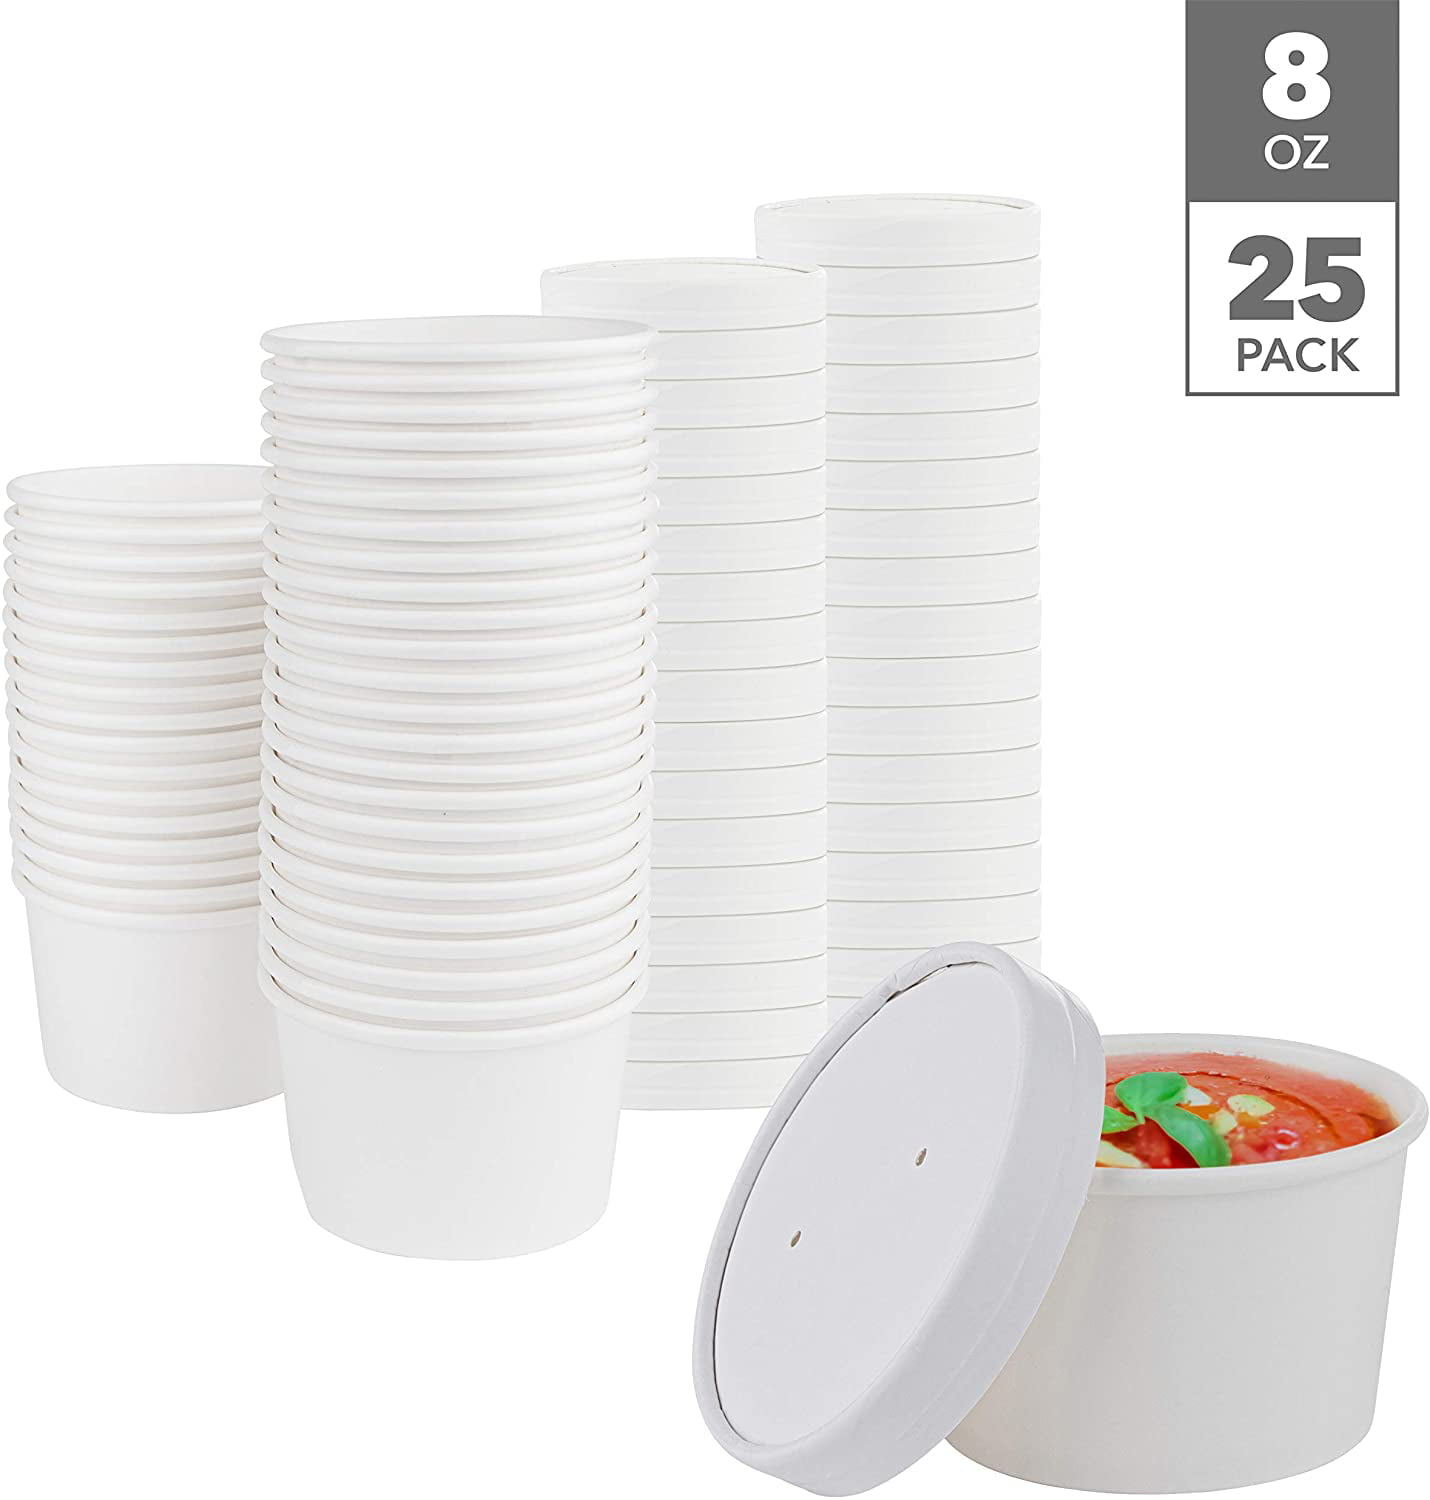 Stock Your Home 8 oz White Disposable Soup Cups with Lids - 25 Pack